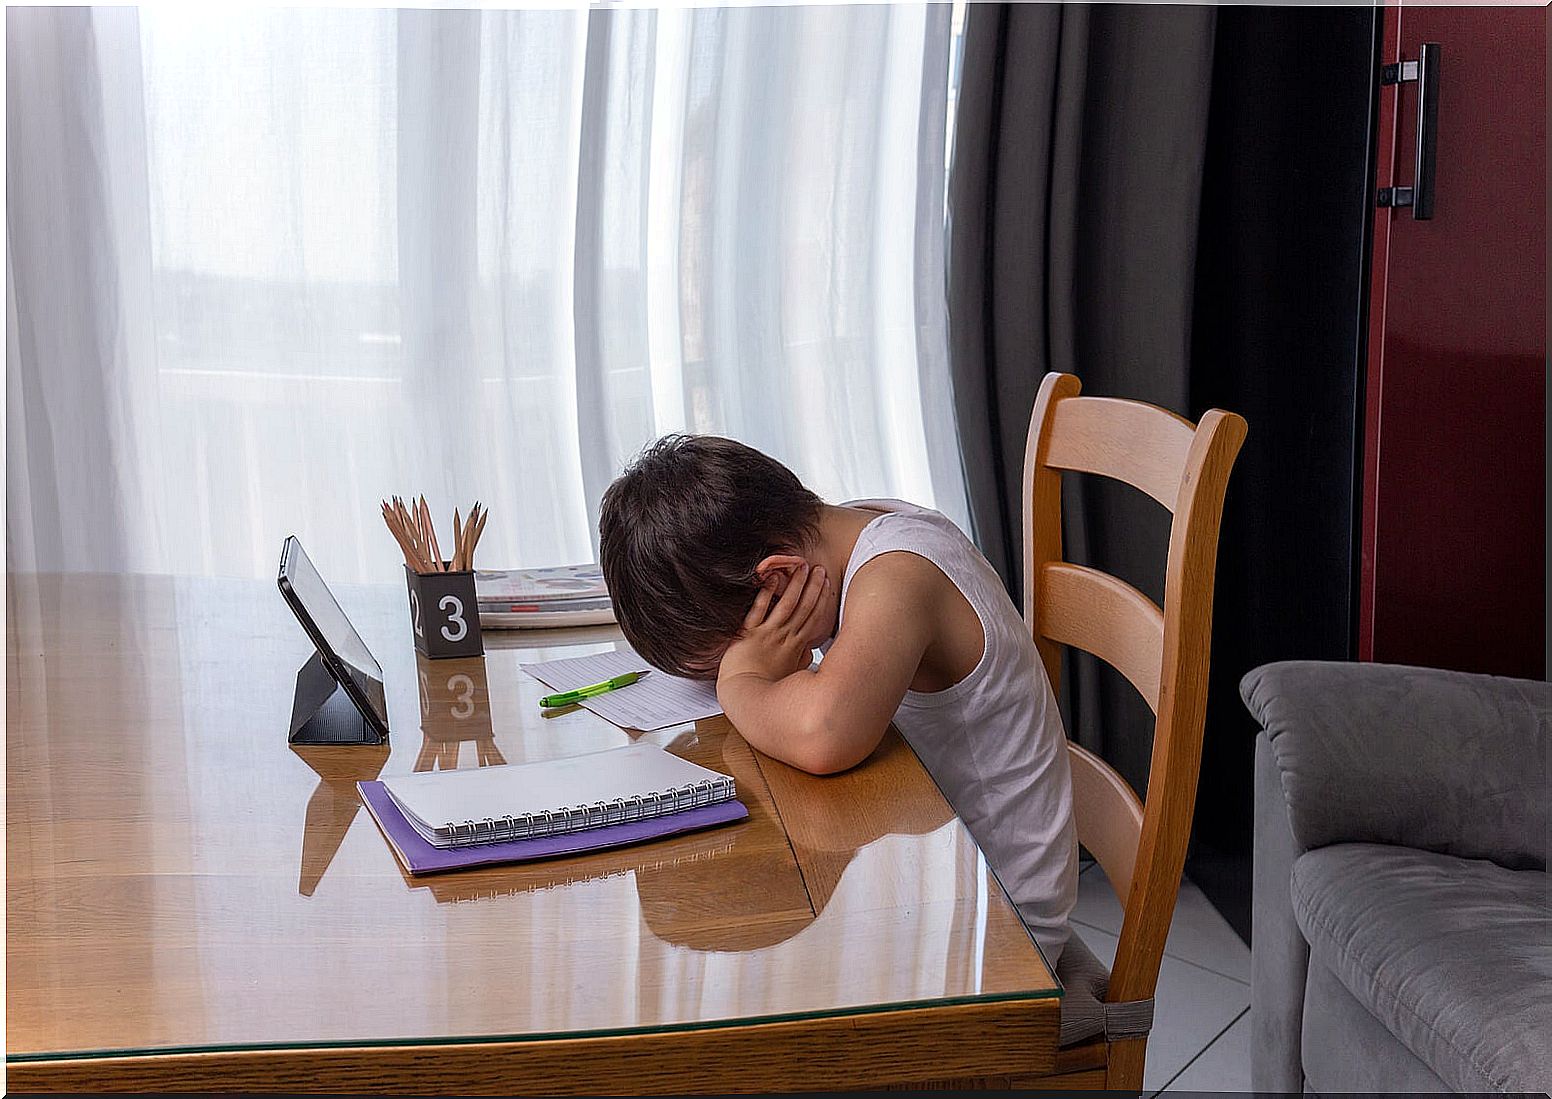 Child getting tired because he does not want to do homework.